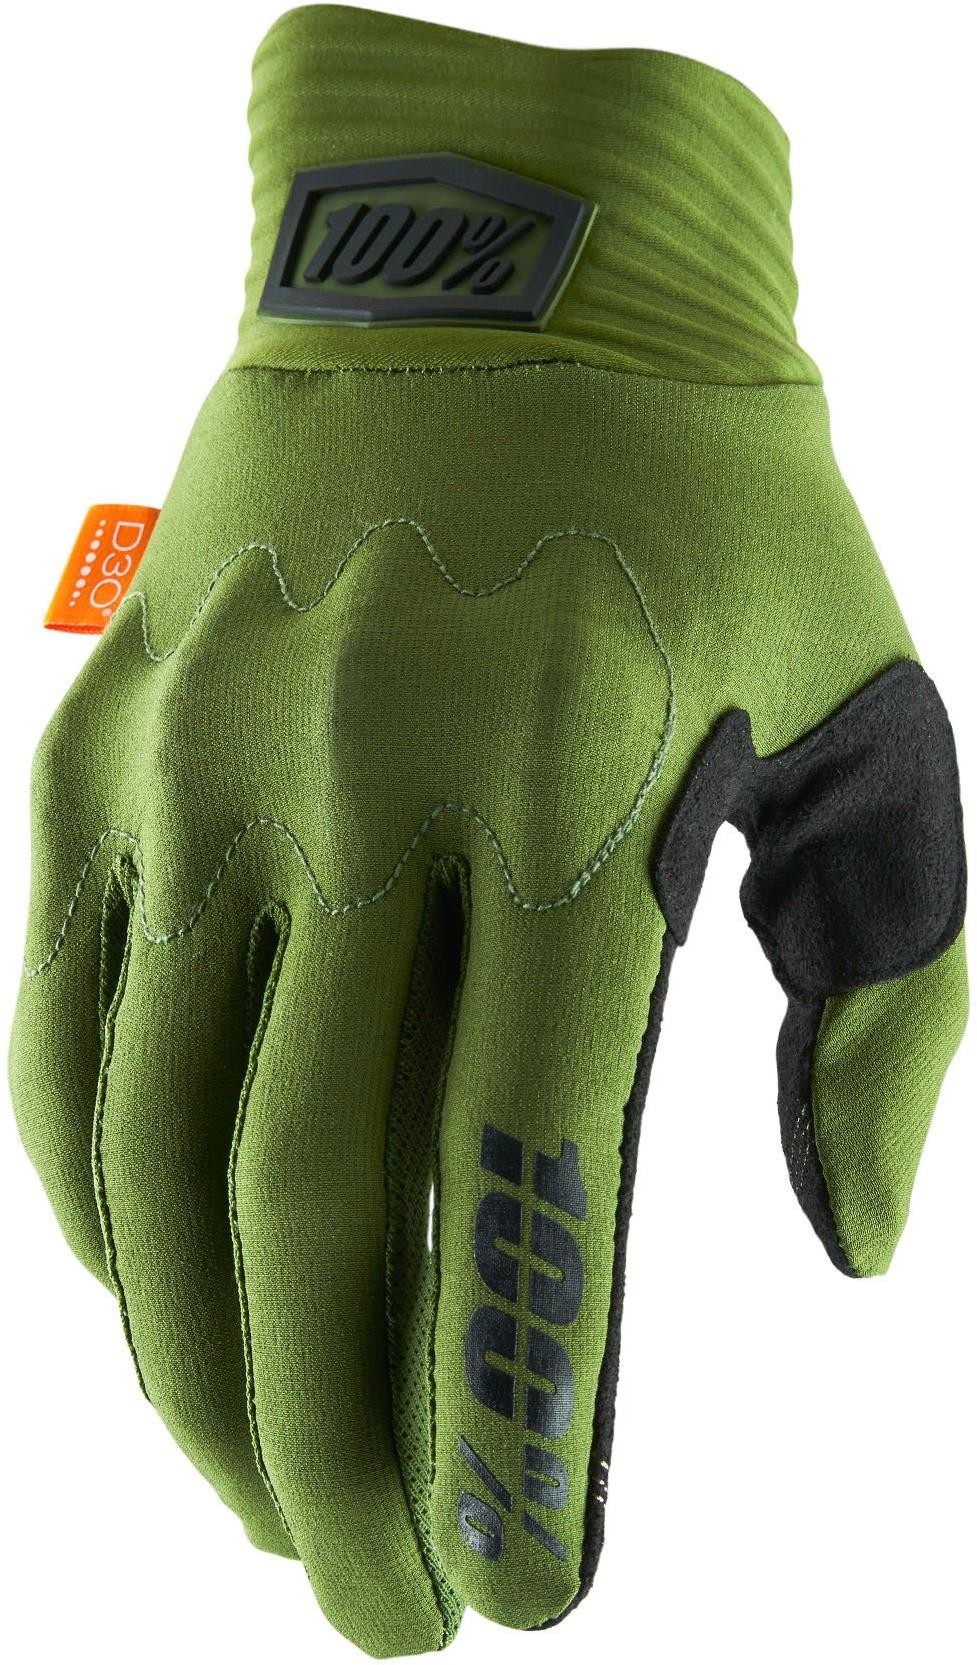 Cognito D30 Long Finger MTB Cycling Gloves image 0